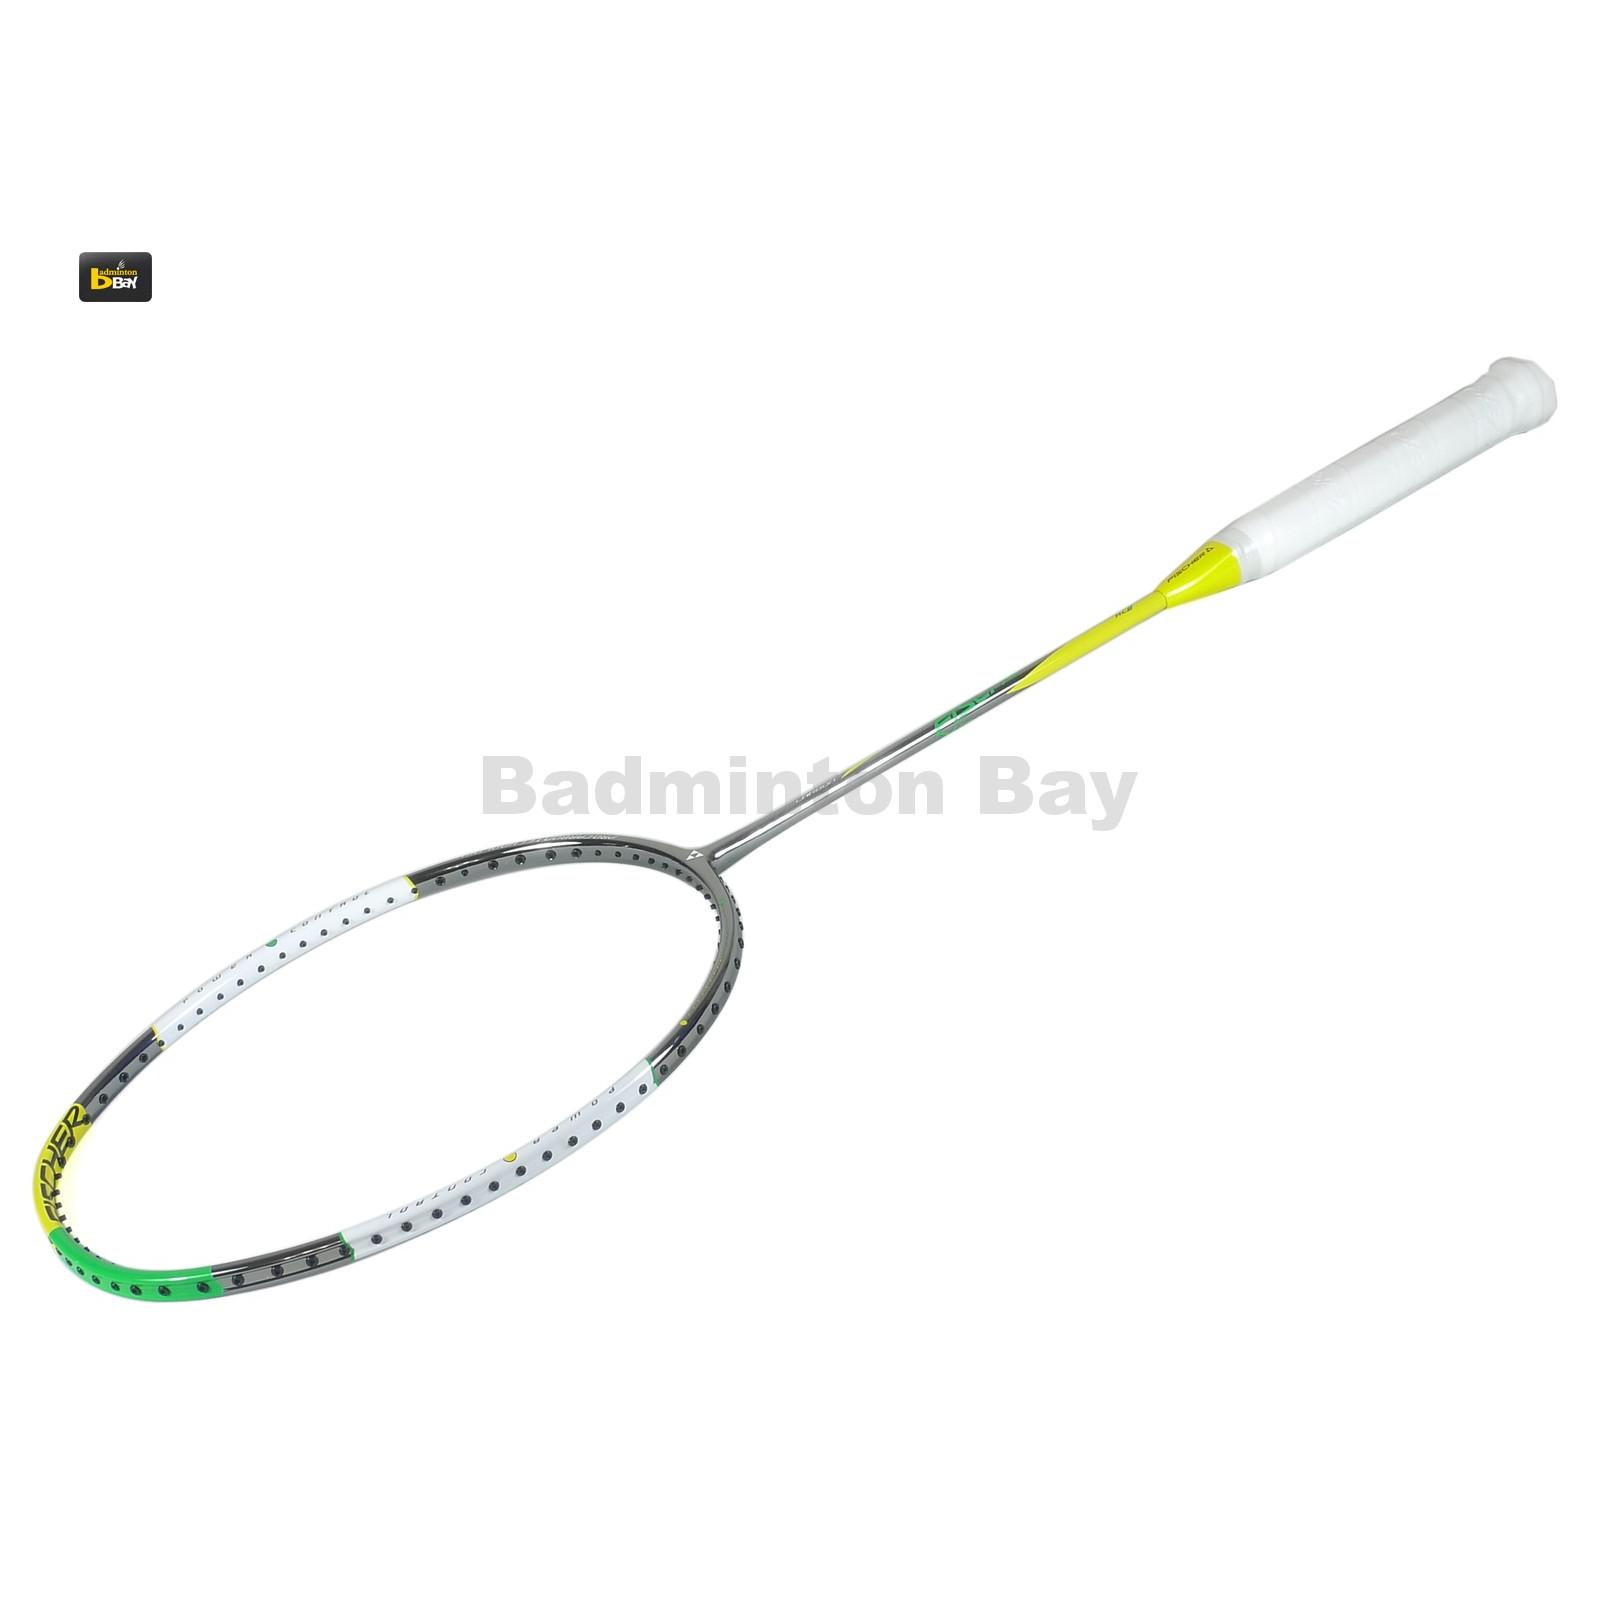 ~ Out of stock Fischer RC7 Chrome Badminton Racket (4U)